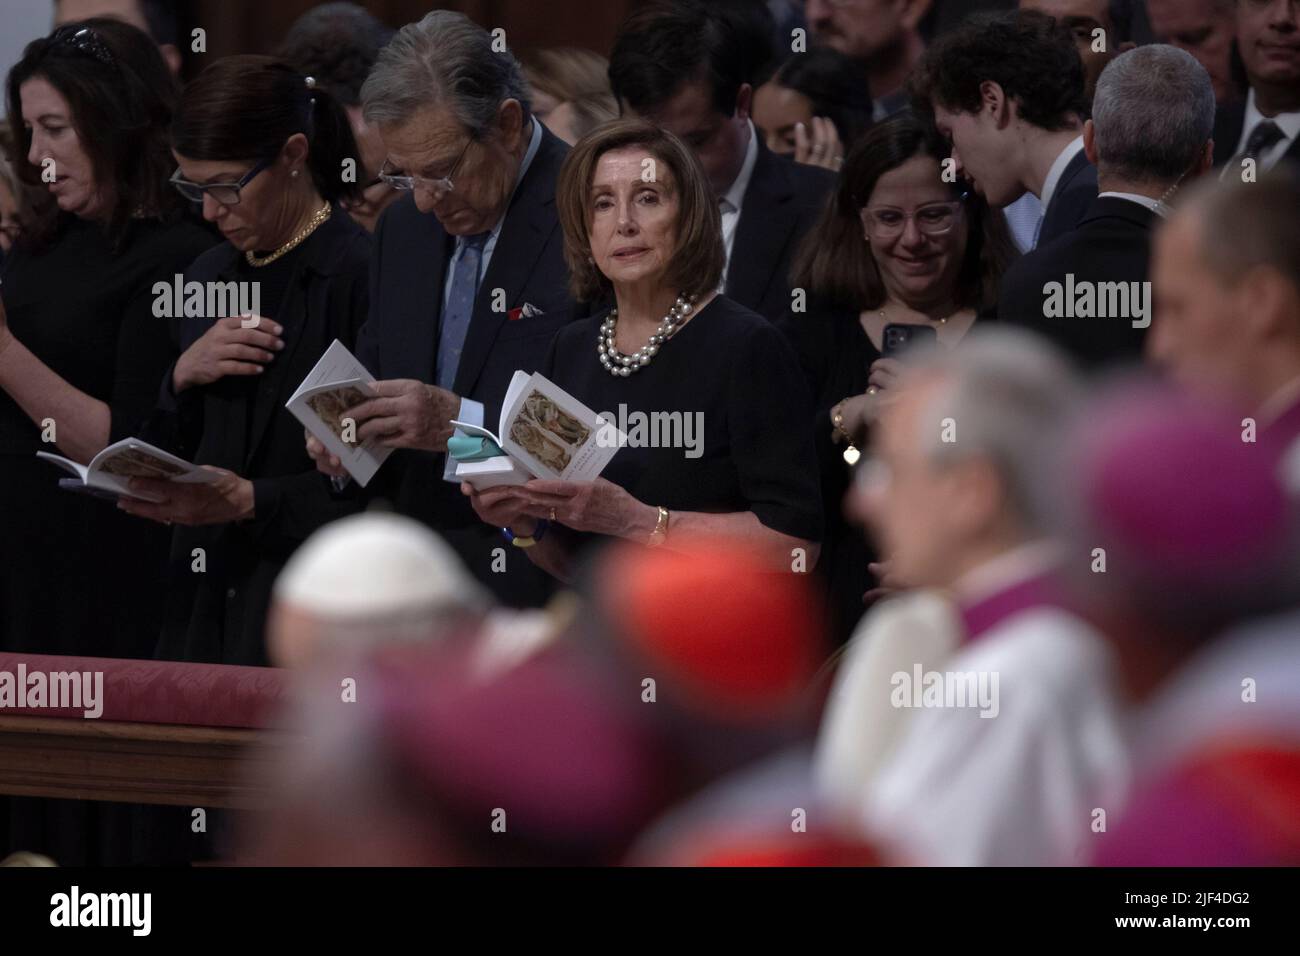 Vatican City, Vatican,. 29 June 2022. Speaker of the House Nancy Pelosi looks at Pope Francis as he celebrates a Mass on the Solemnity of Saints Peter and Paul, in St. Peter's Basilica. Credit: Maria Grazia Picciarella/Alamy Live News Stock Photo